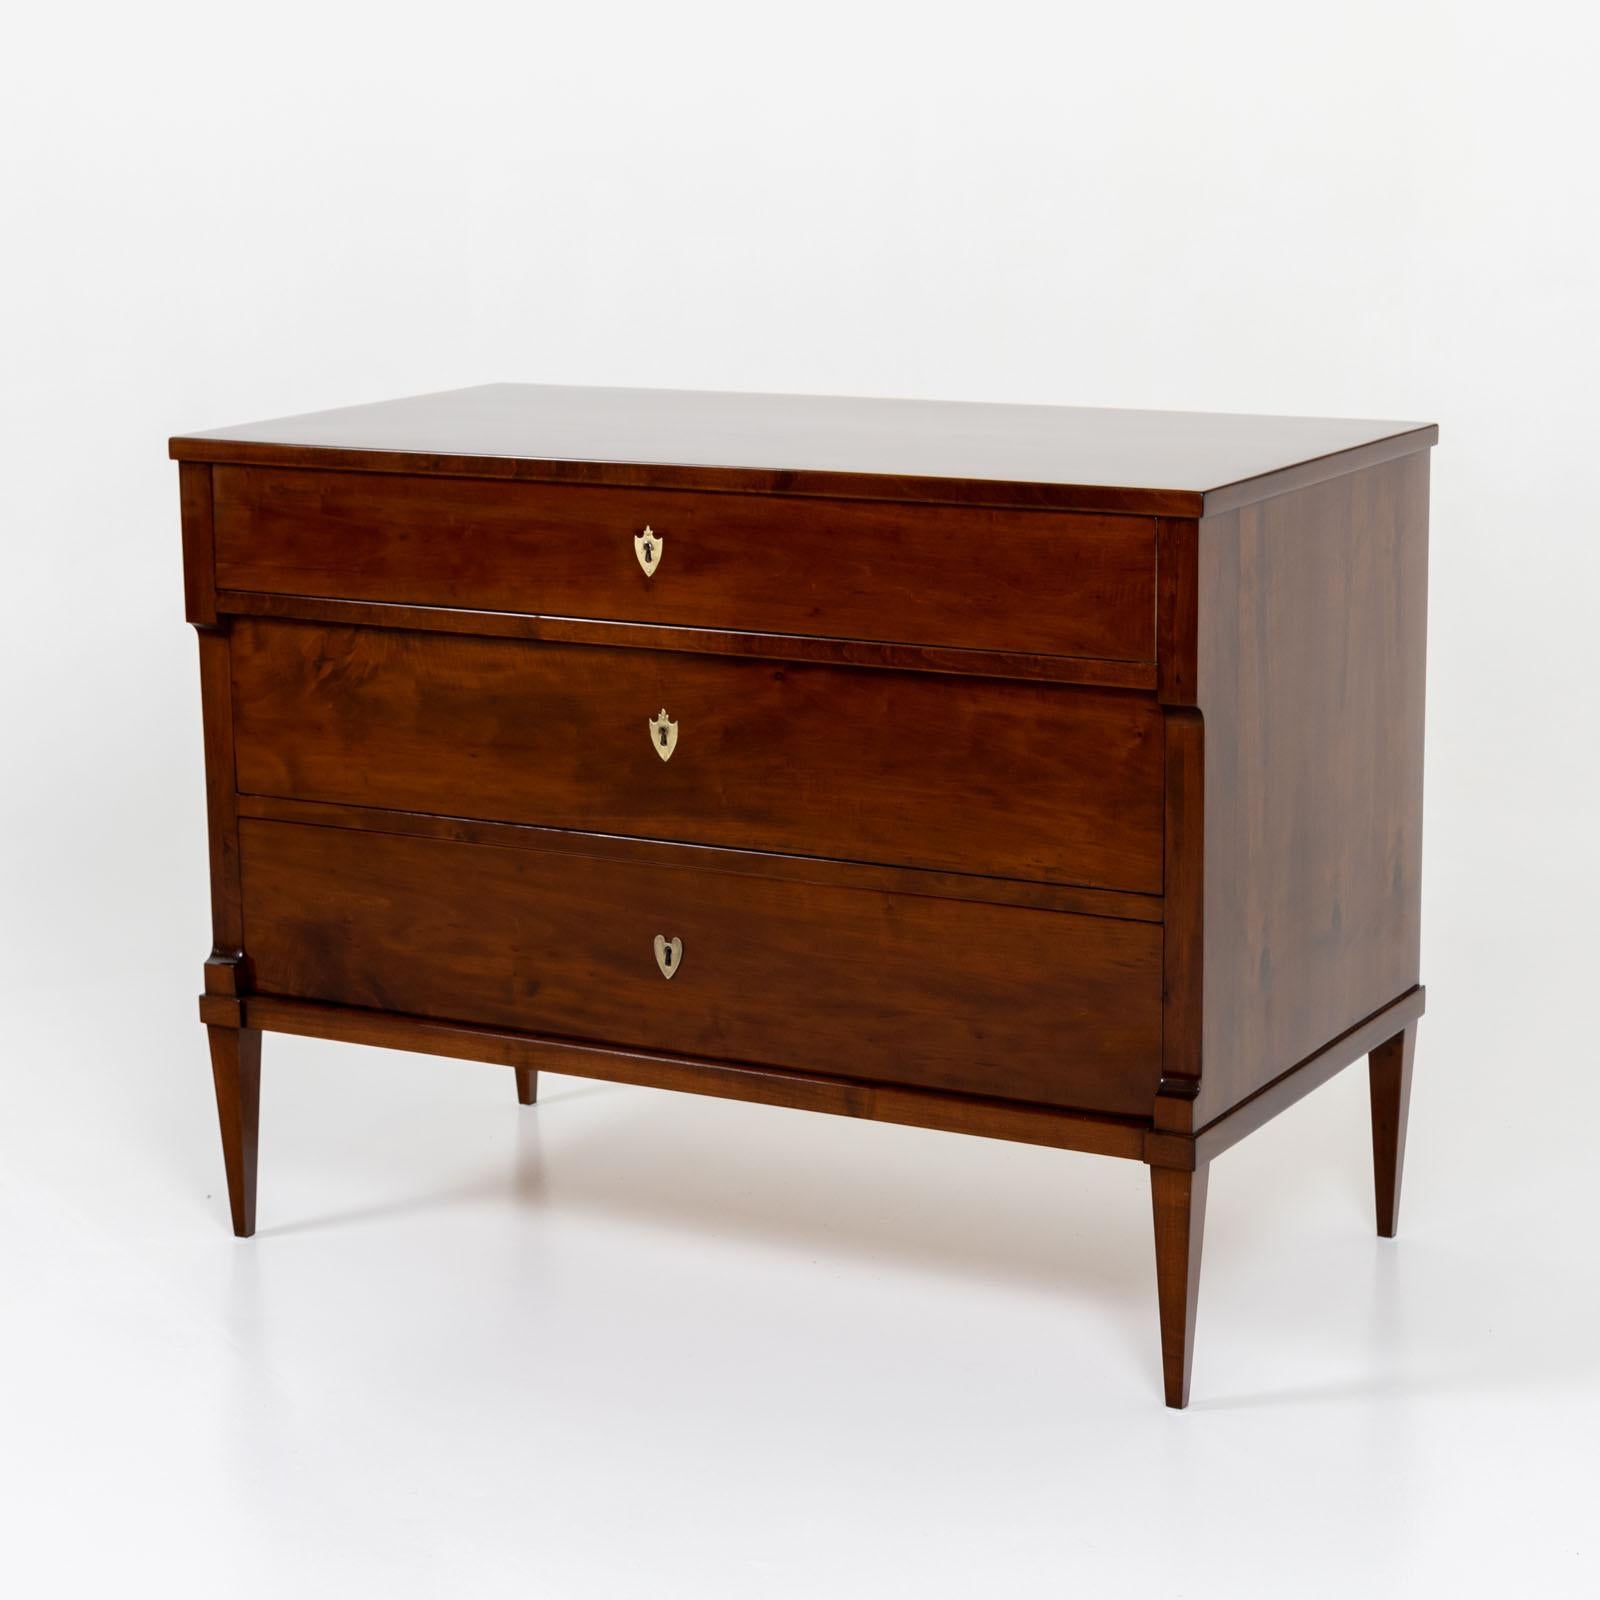 Italian Neoclassical Chest of Drawers, early 19th Century For Sale